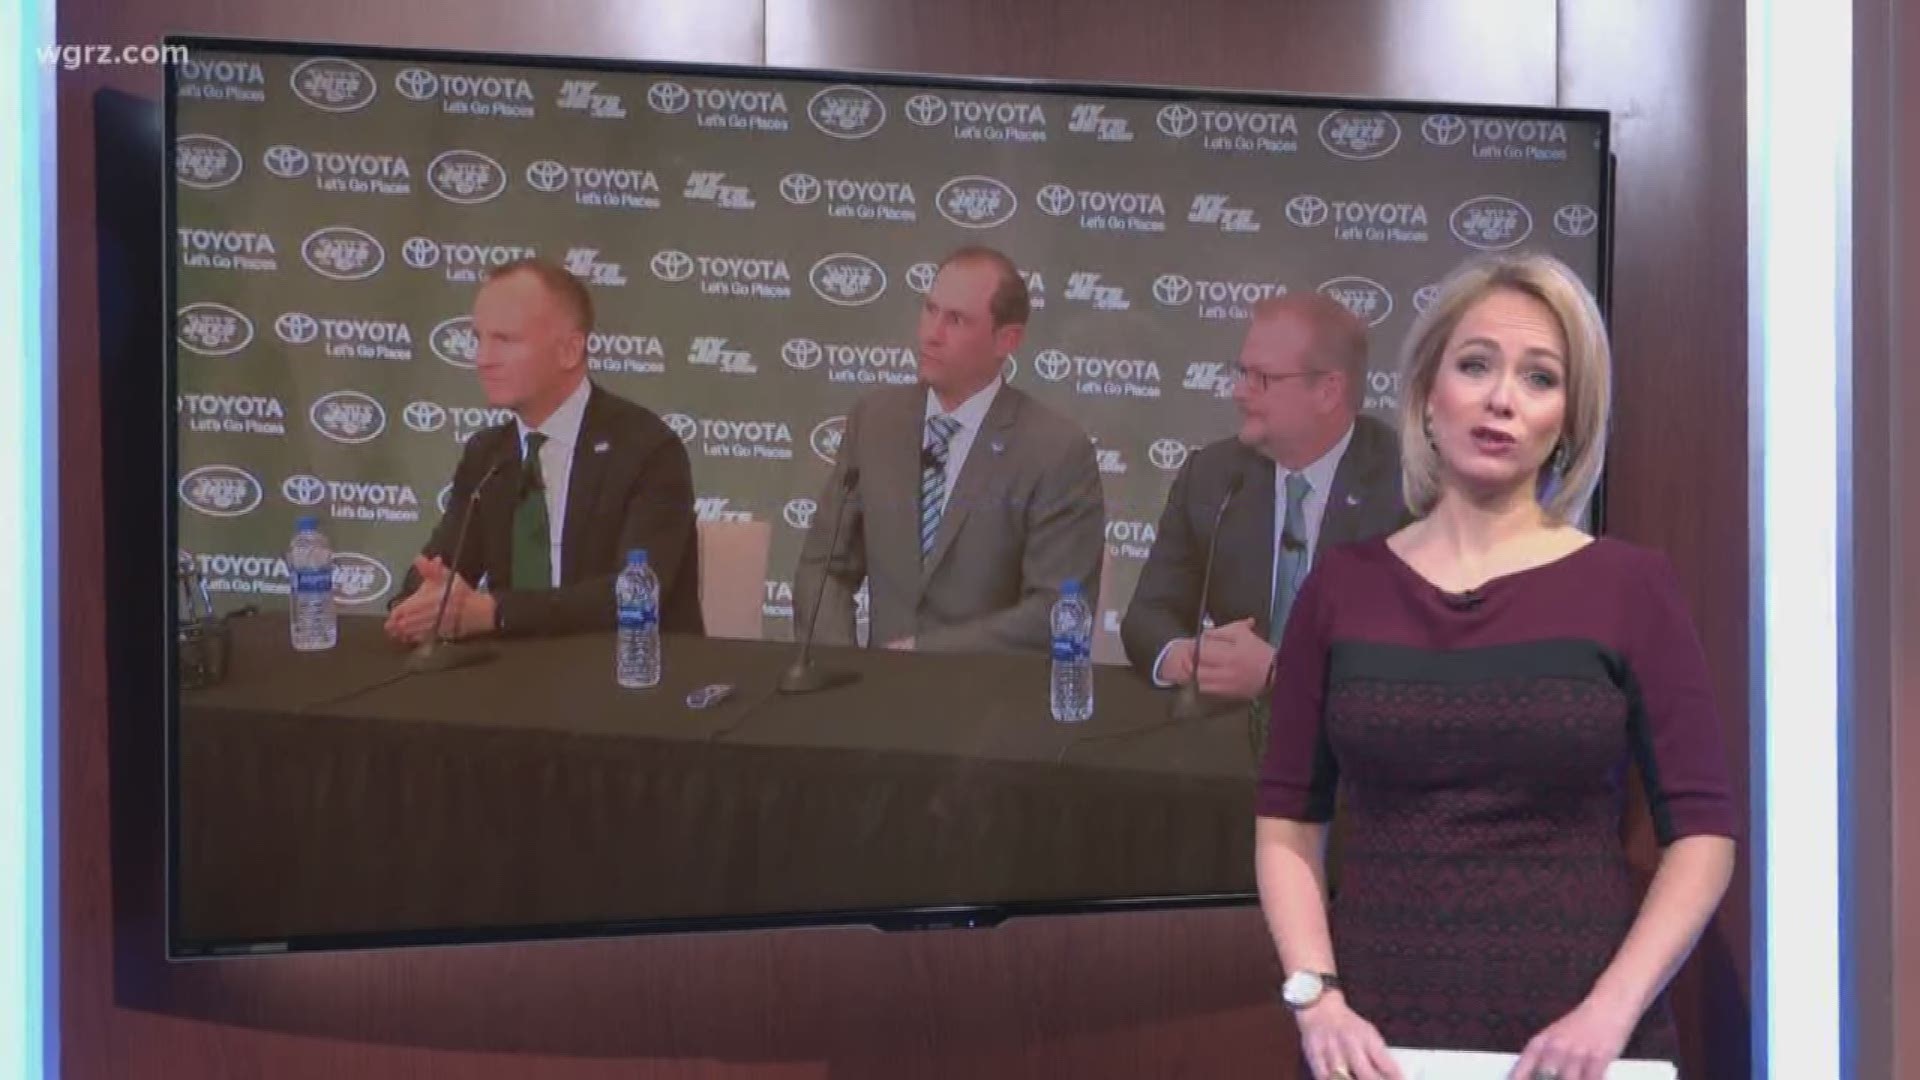 The internet turns new Jets coach into a meme after interesting press conference